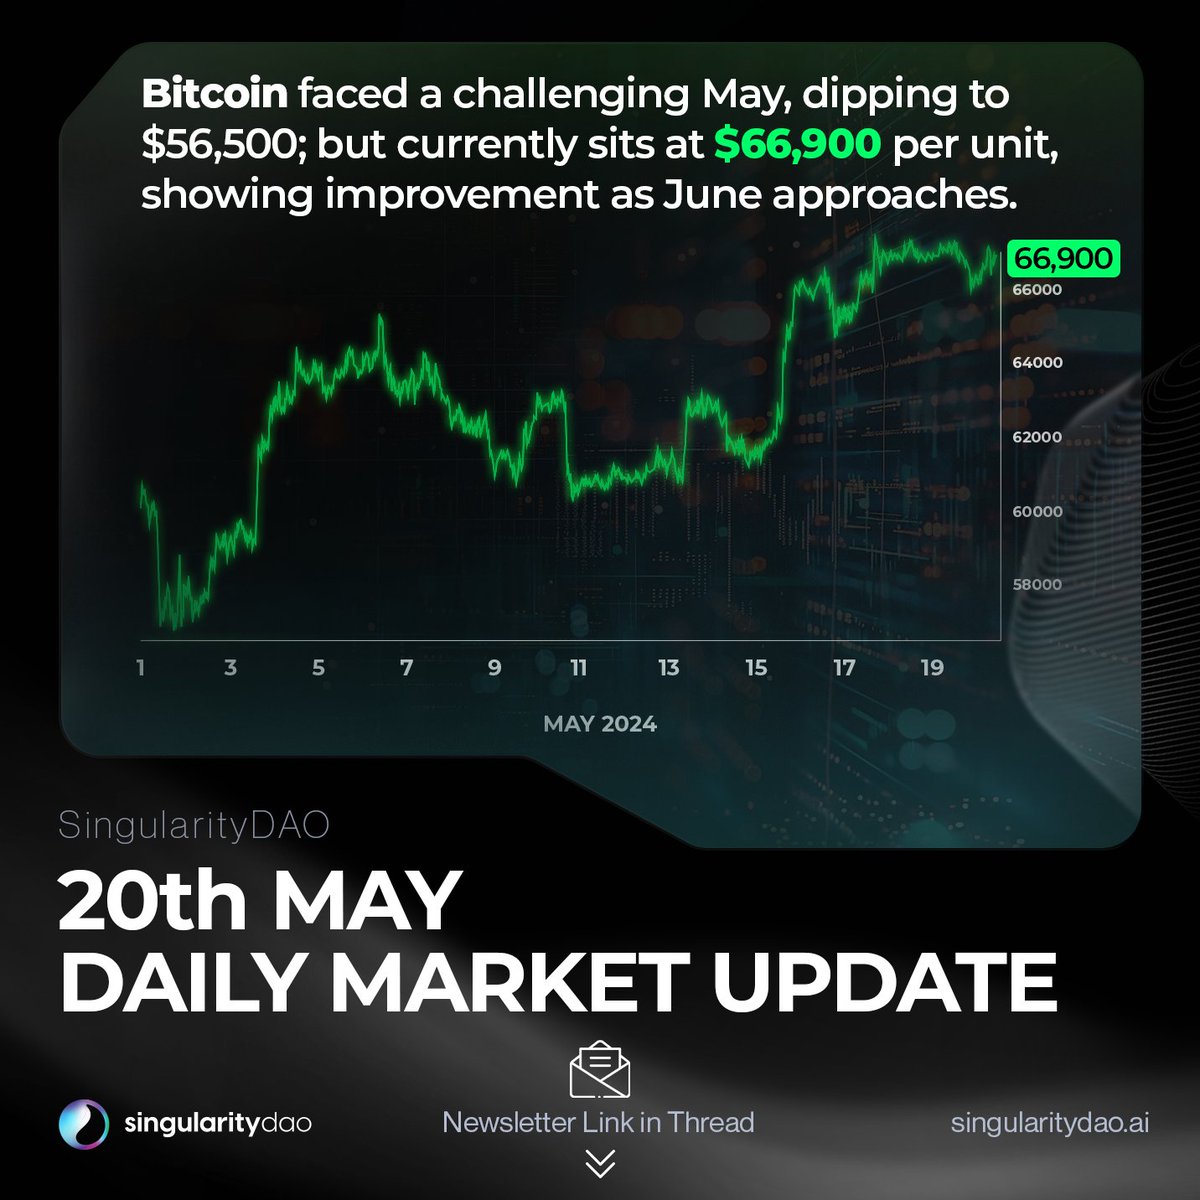 Your Daily Market Update - May 20

Bitcoin faced a challenging May, dipping below $60,000 to $56,500 on May 1, 2024. 

But at $66,900 per unit Currently, it's showing improvement as June approaches.